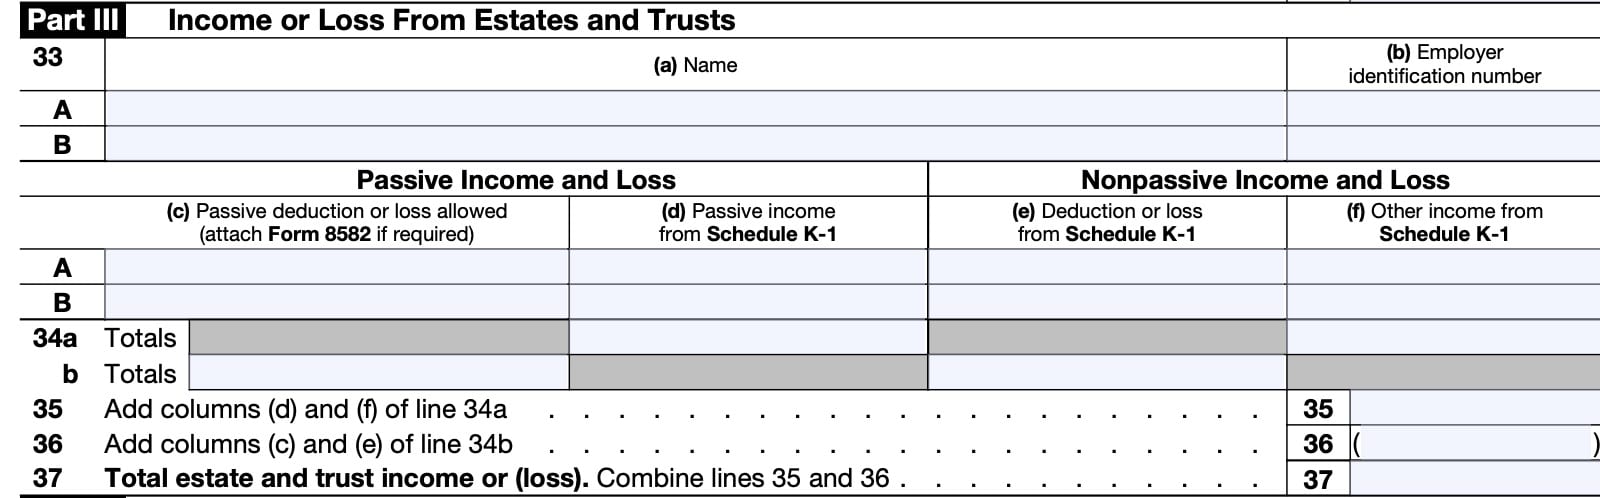 IRS Schedule E, Part III: Income or Loss from Estates and Trusts